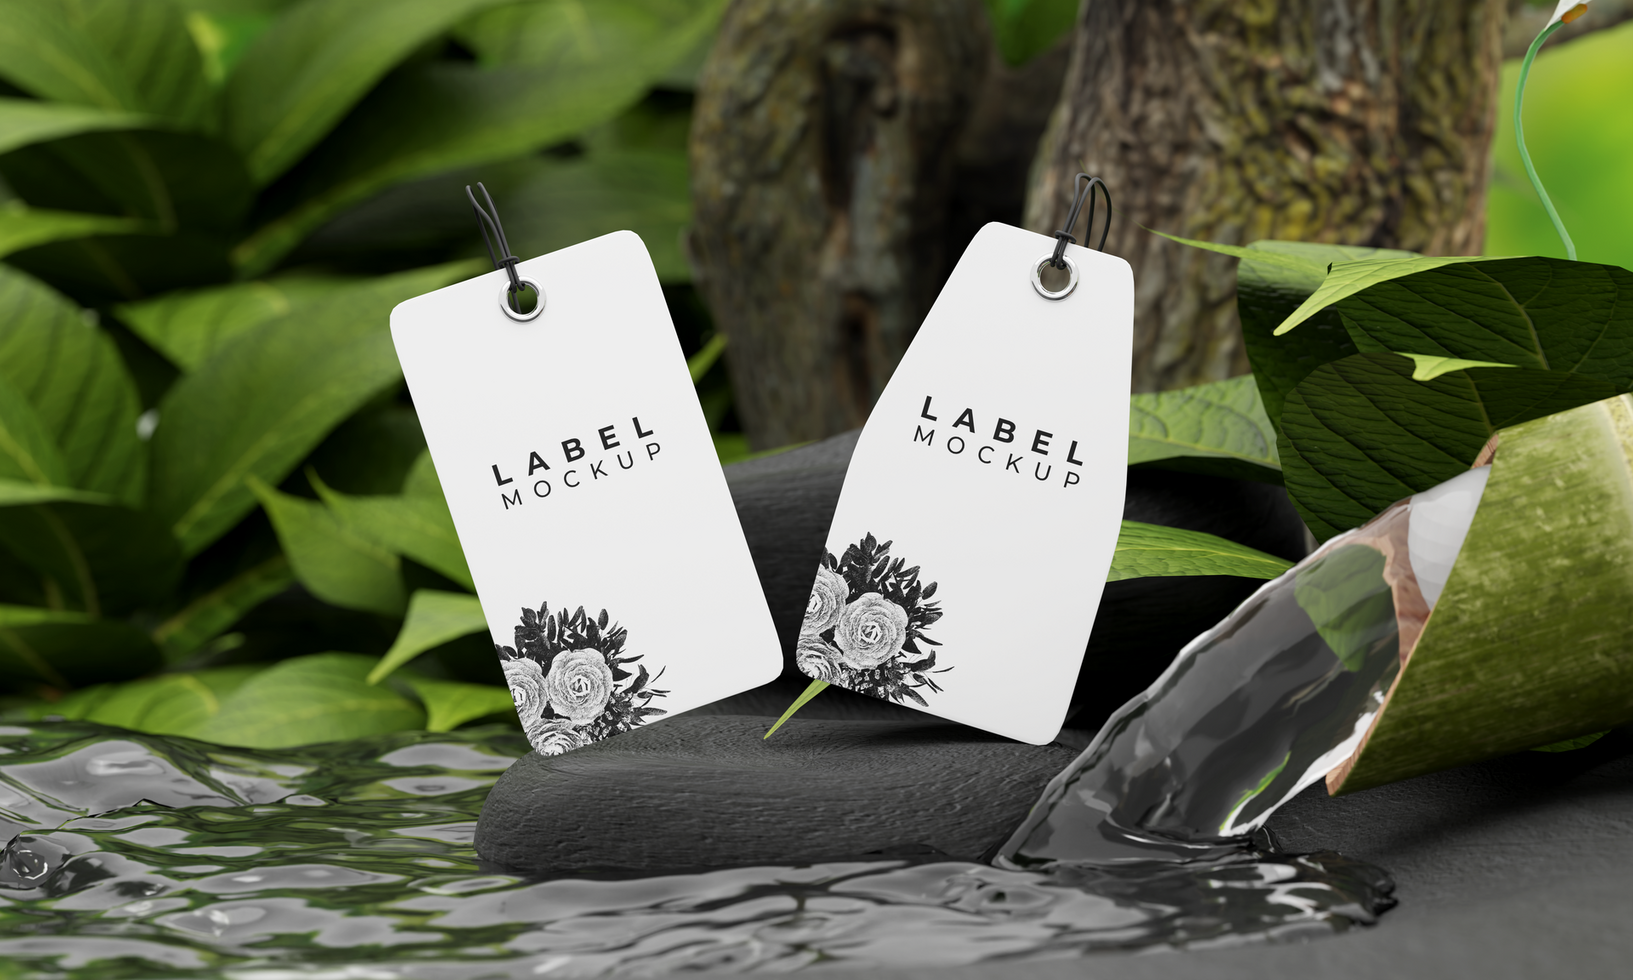 Branding Tag label mockup nature style psd